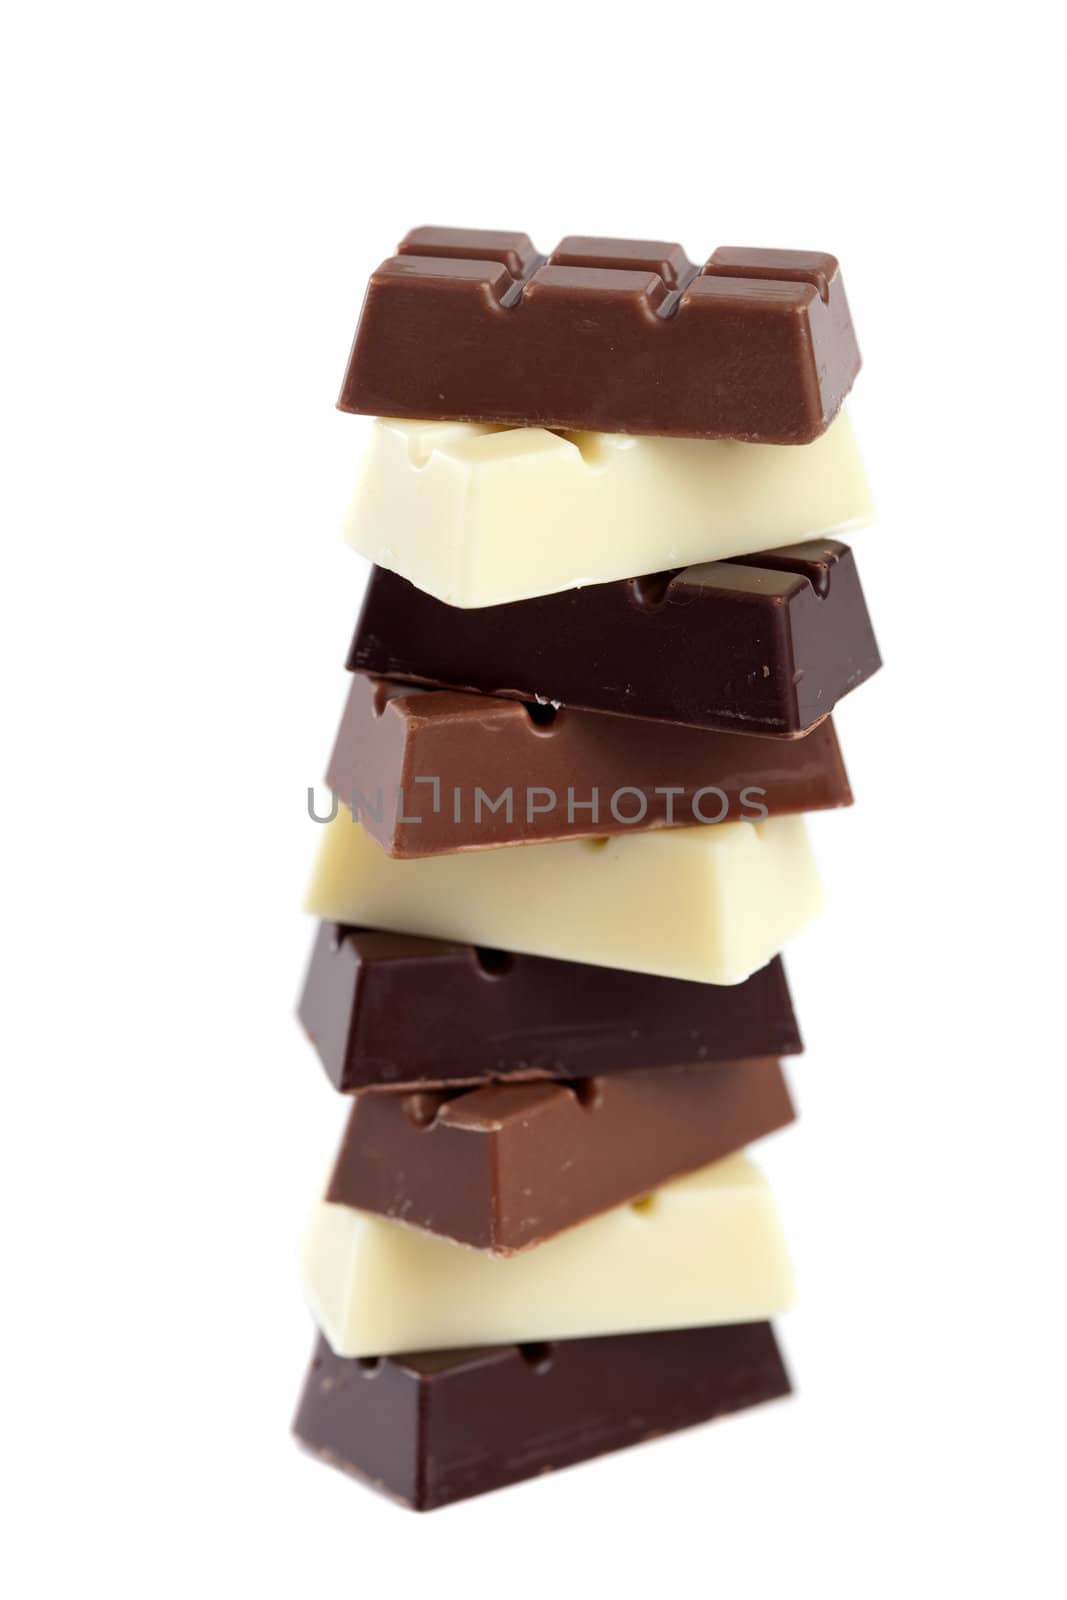 Pile of various colored chocolates; white, brown and dark chocolate